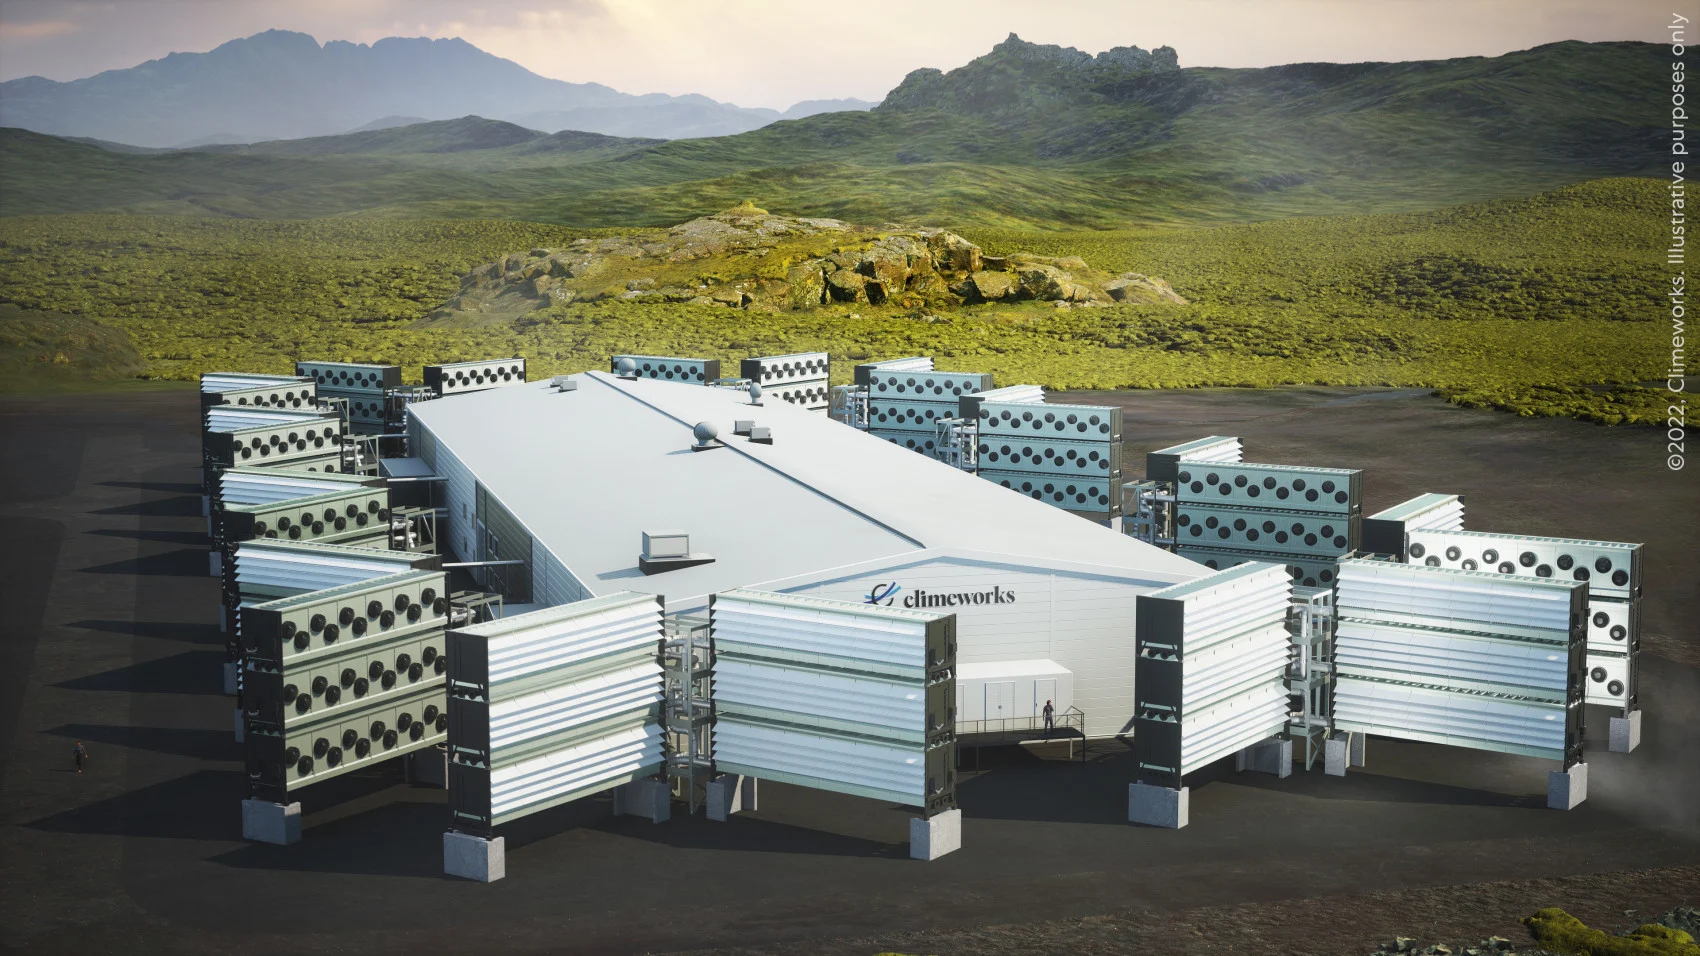 Work begins on what could become Earth's biggest carbon capture facility